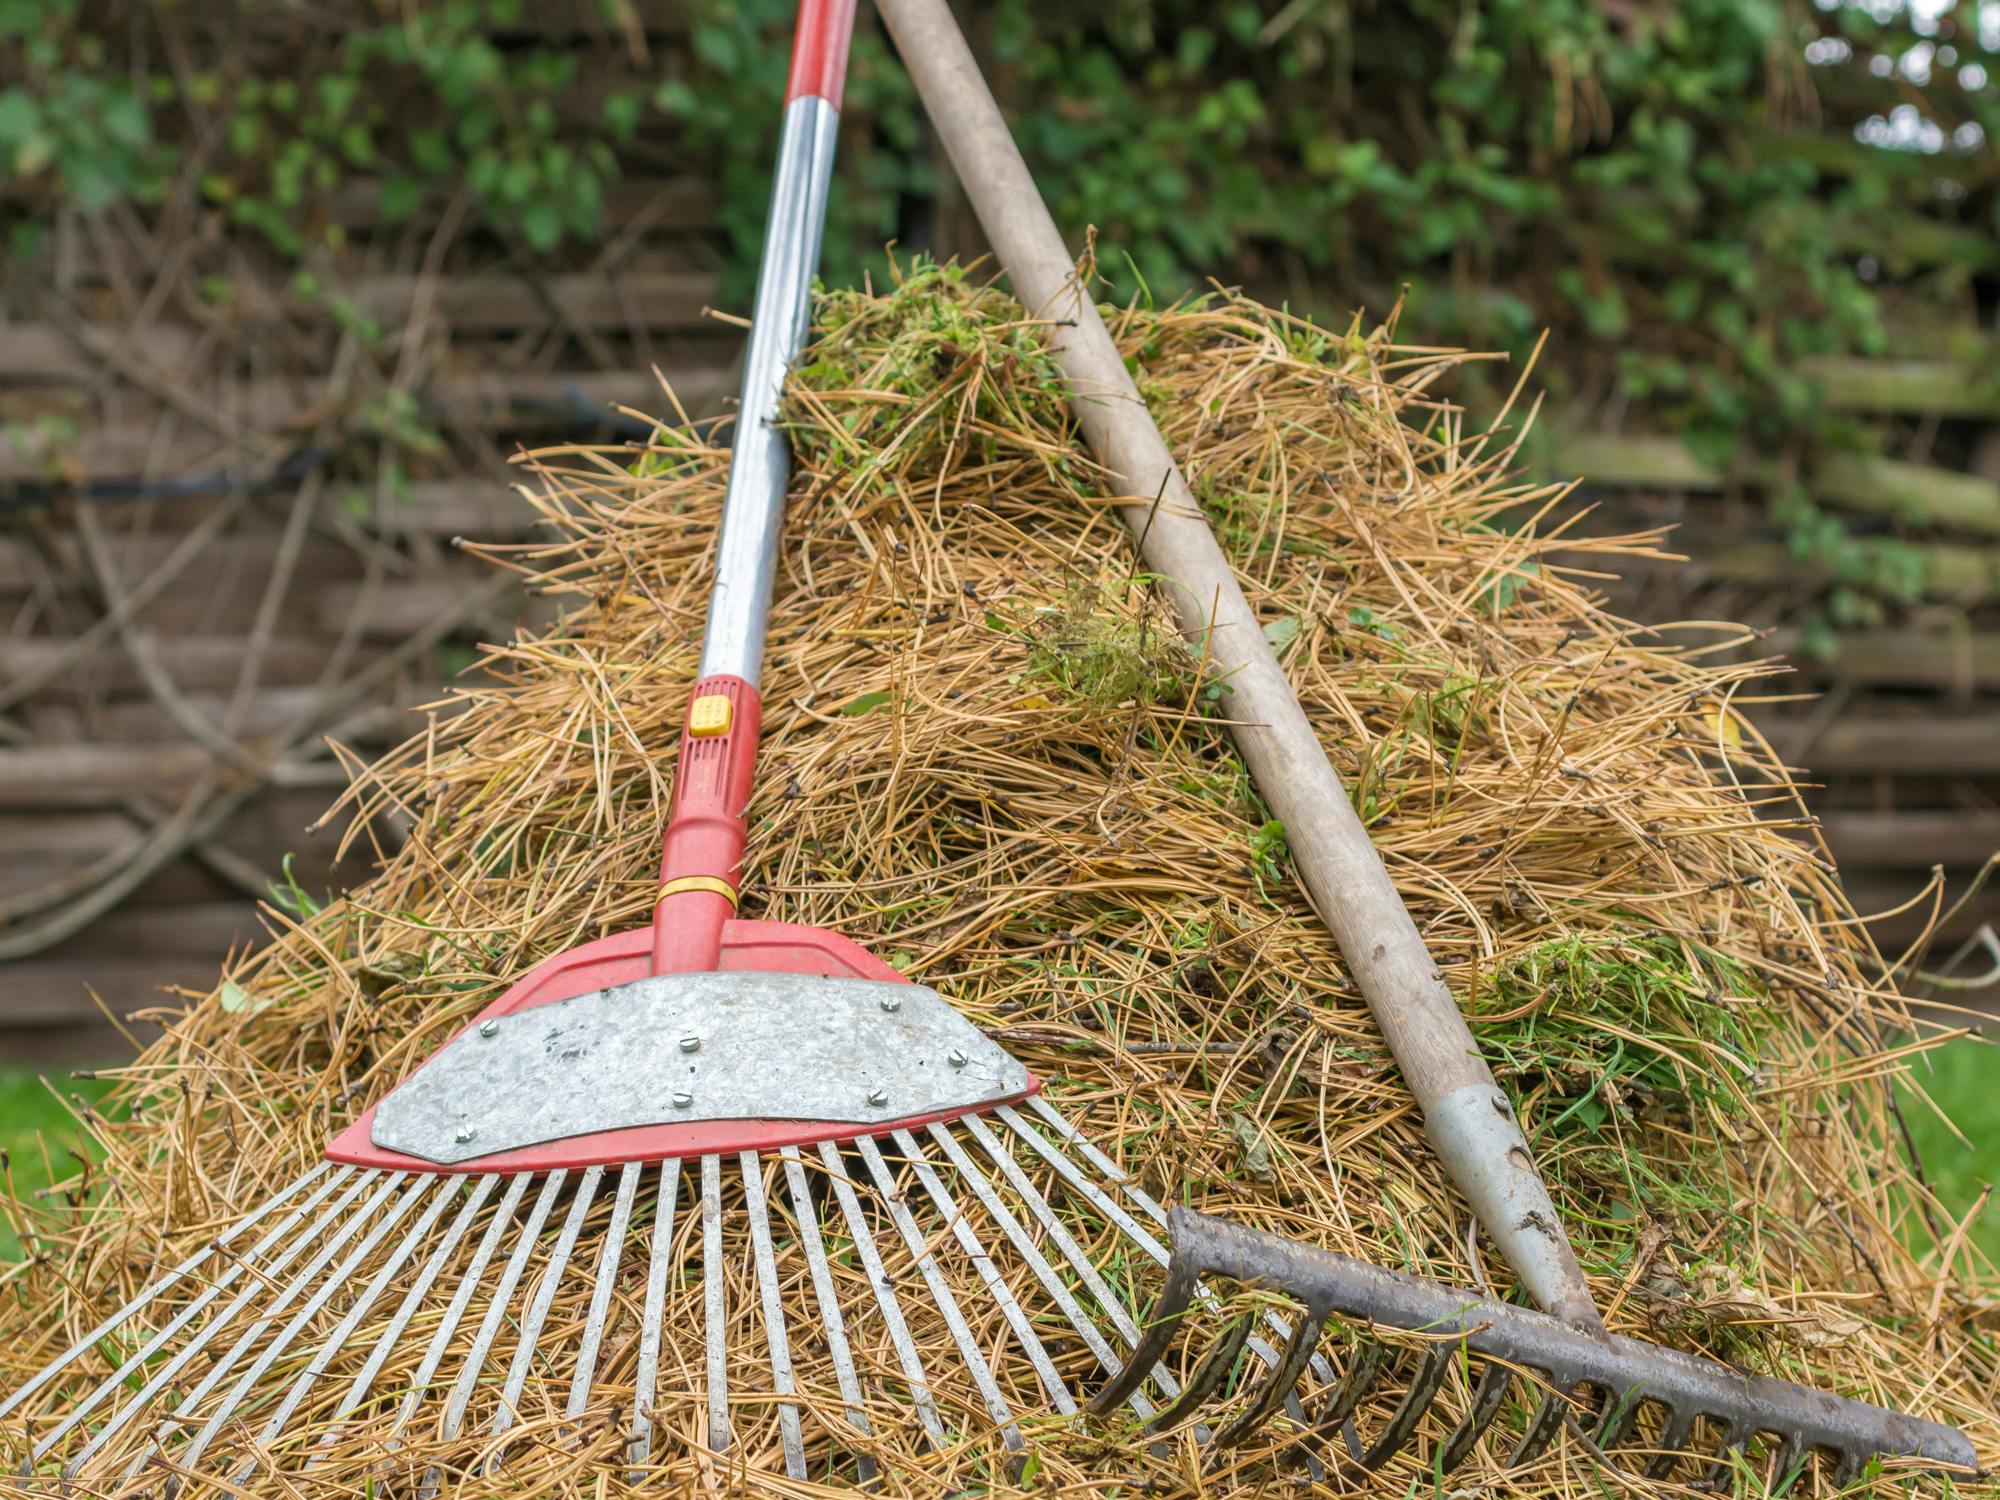 pine needles raked in a pile